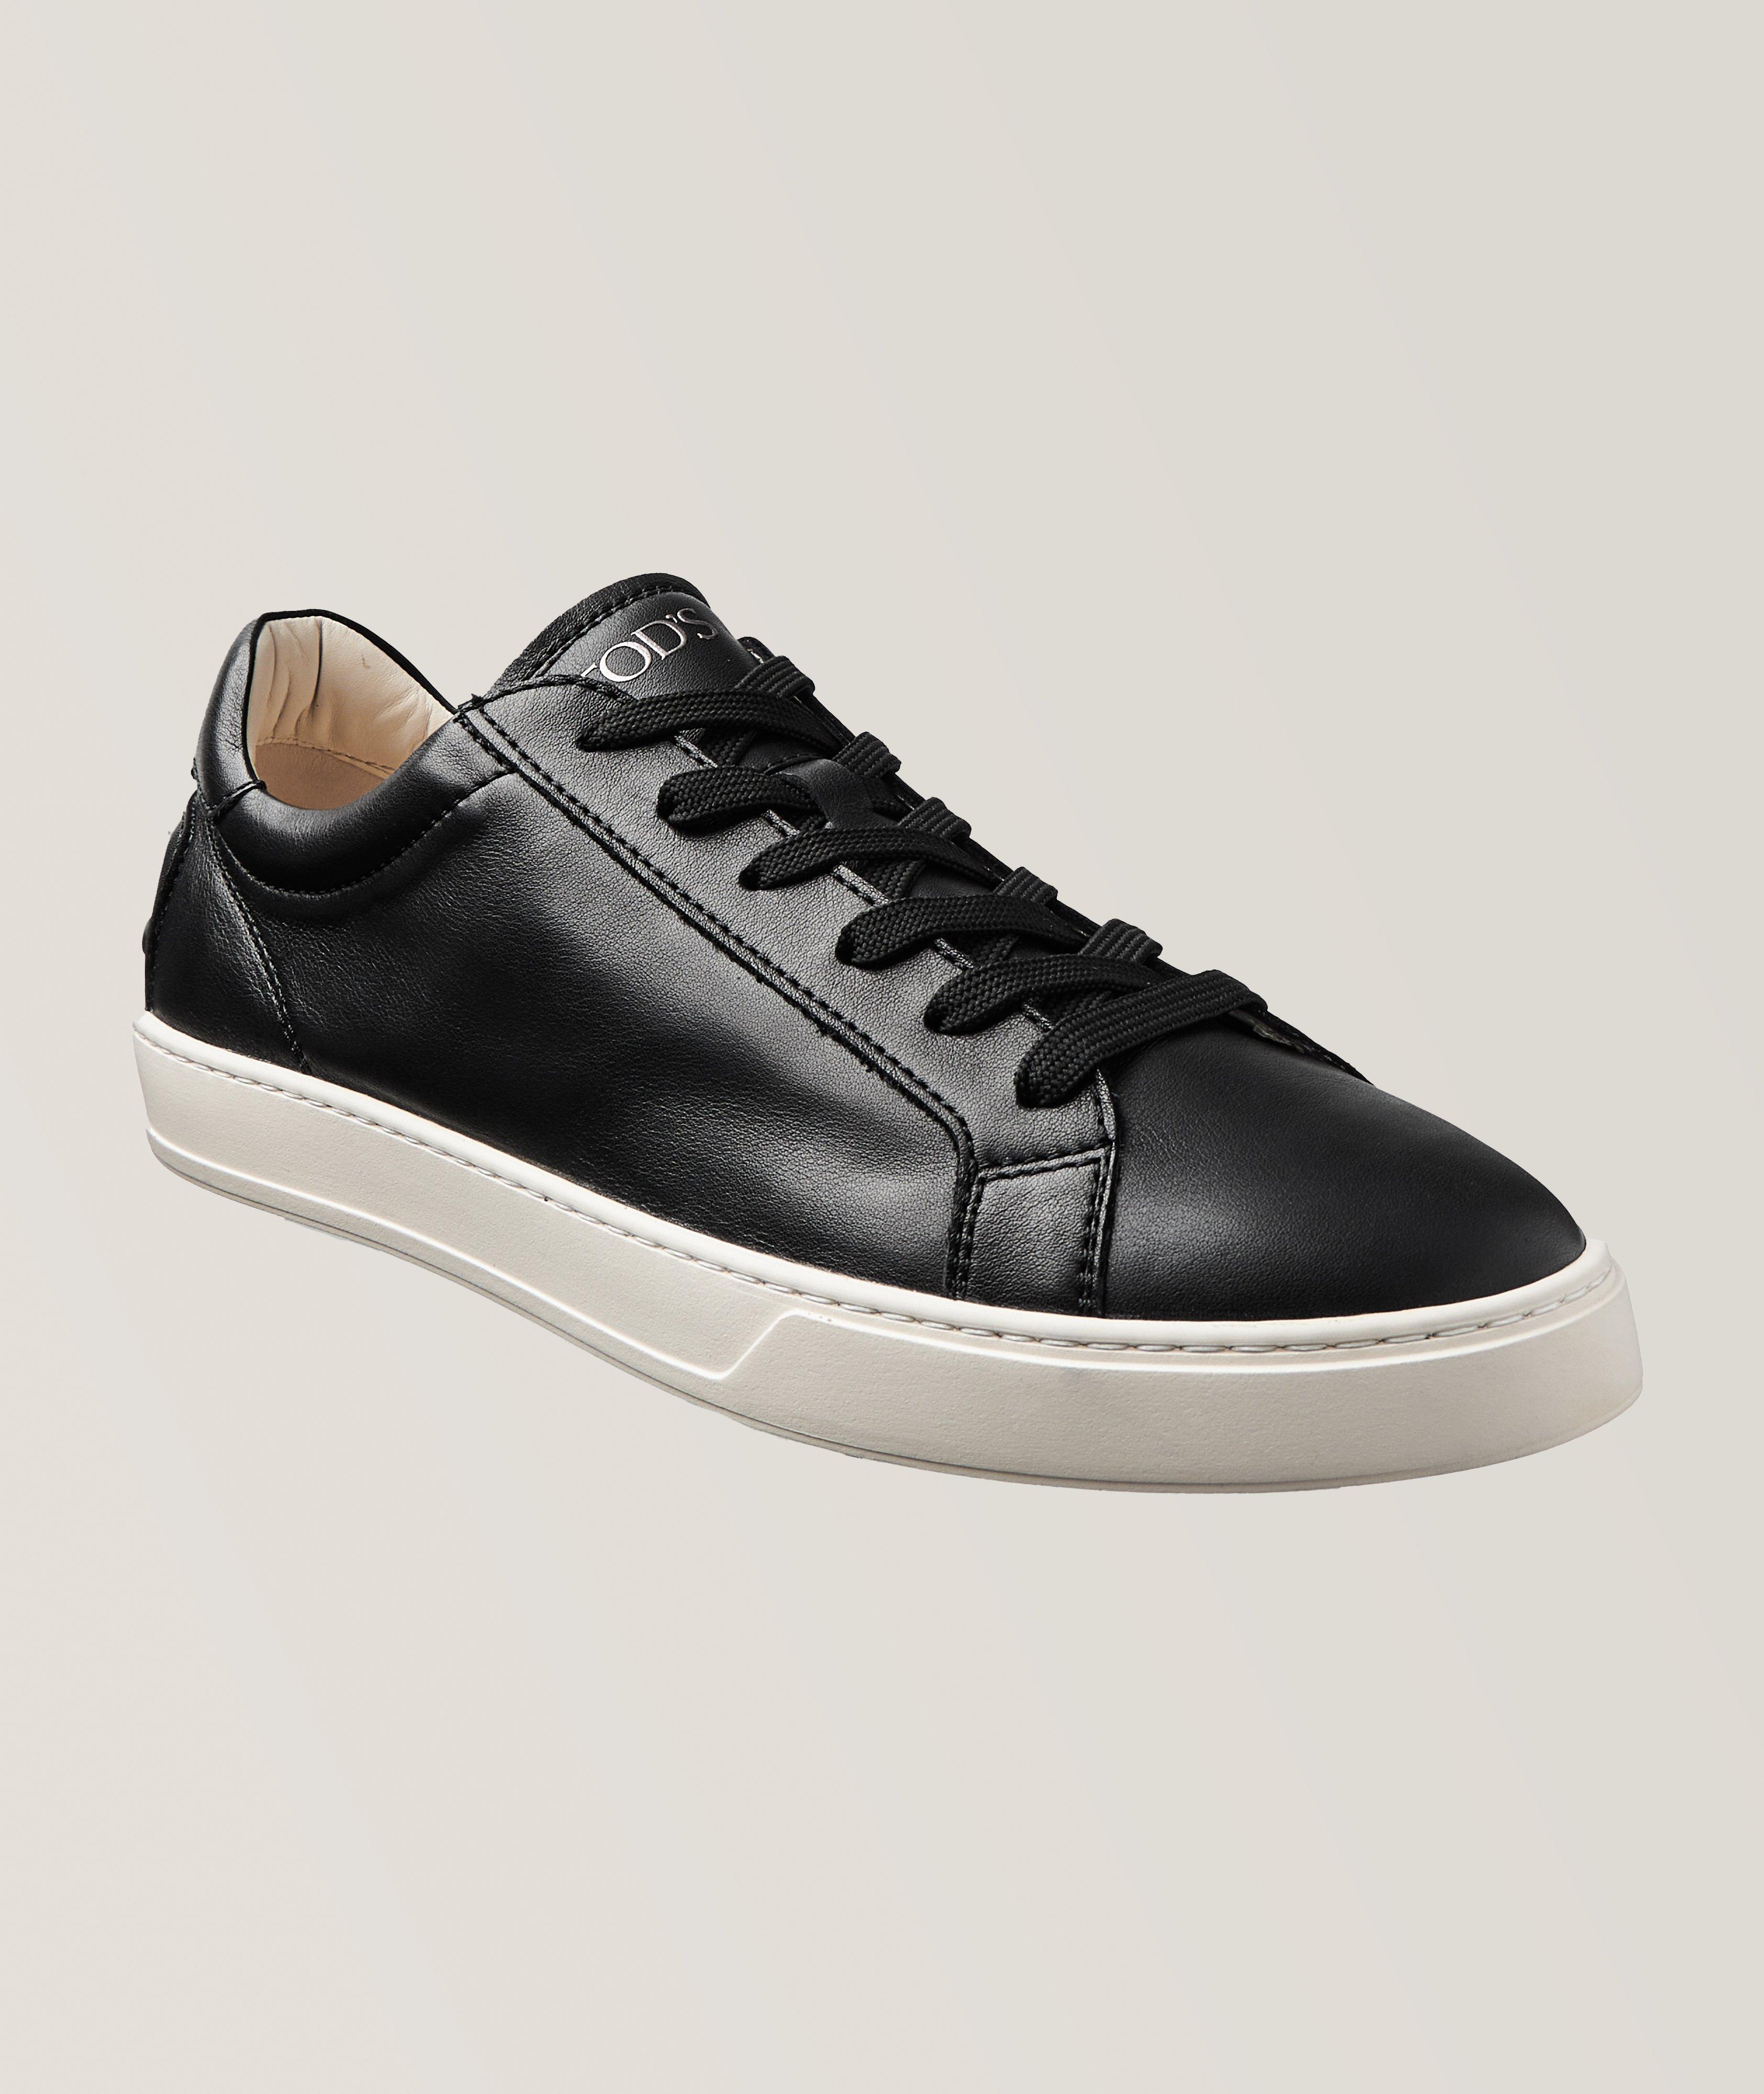 Leather Tennis Sneakers image 0